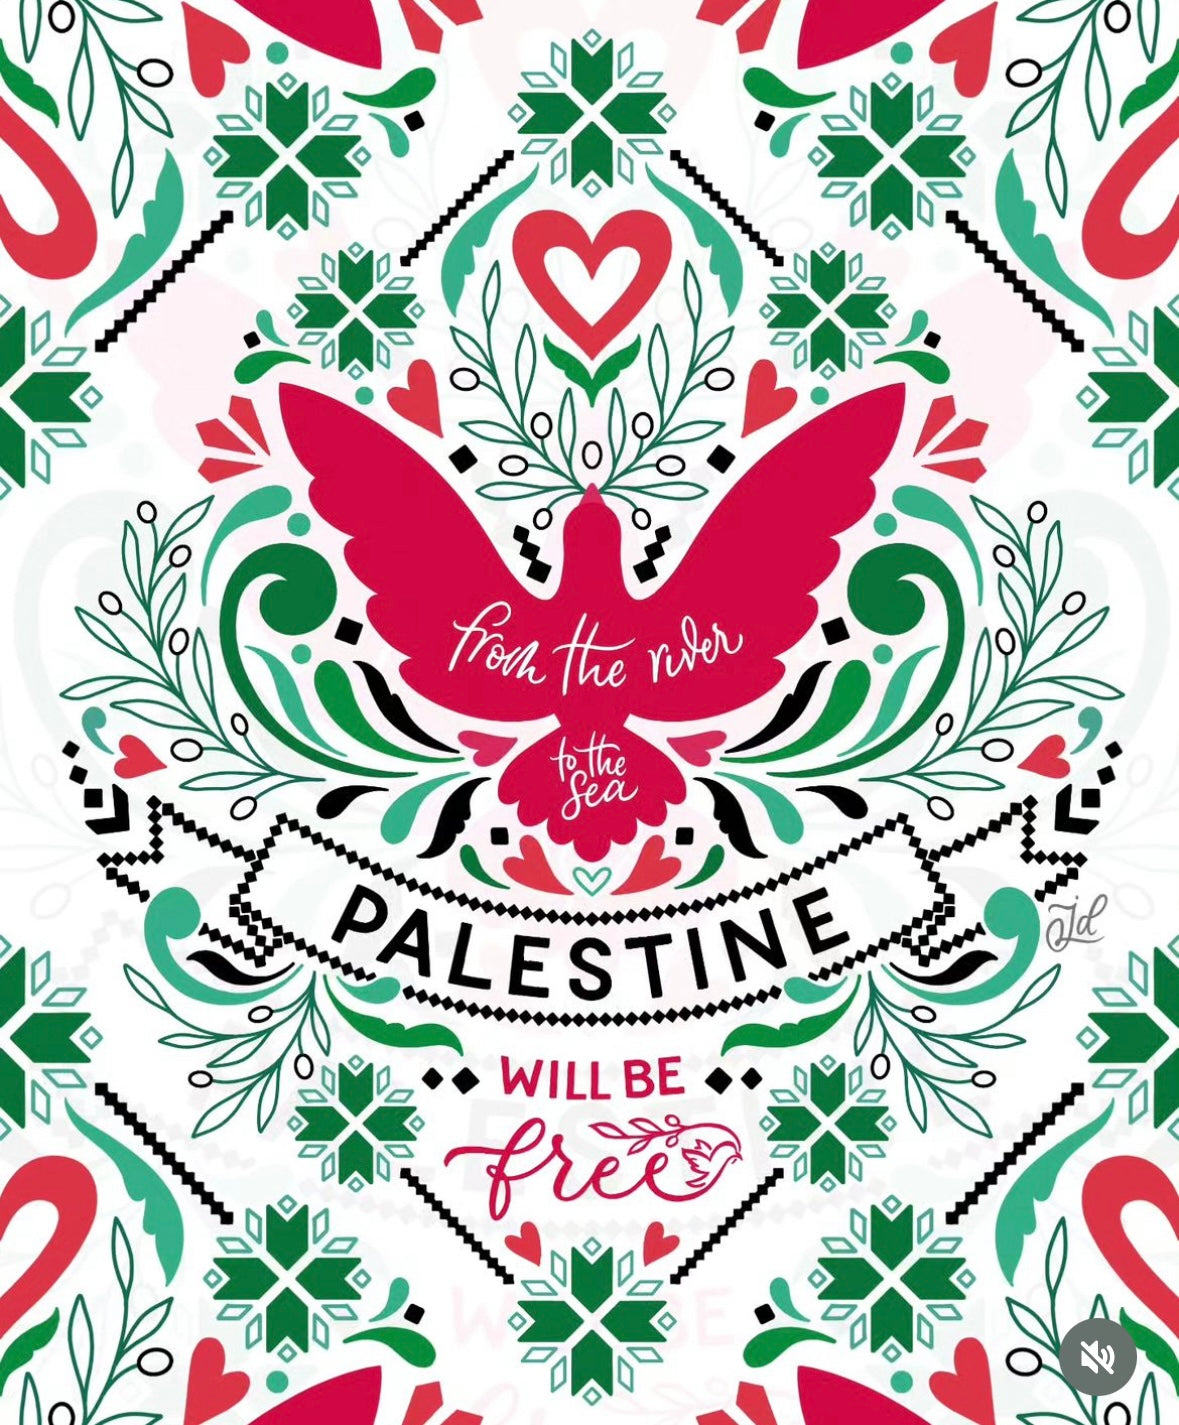 From the river to the sea - Palestine Laptop Sticker by Junoon Designs (Barbados) (6”x7”)